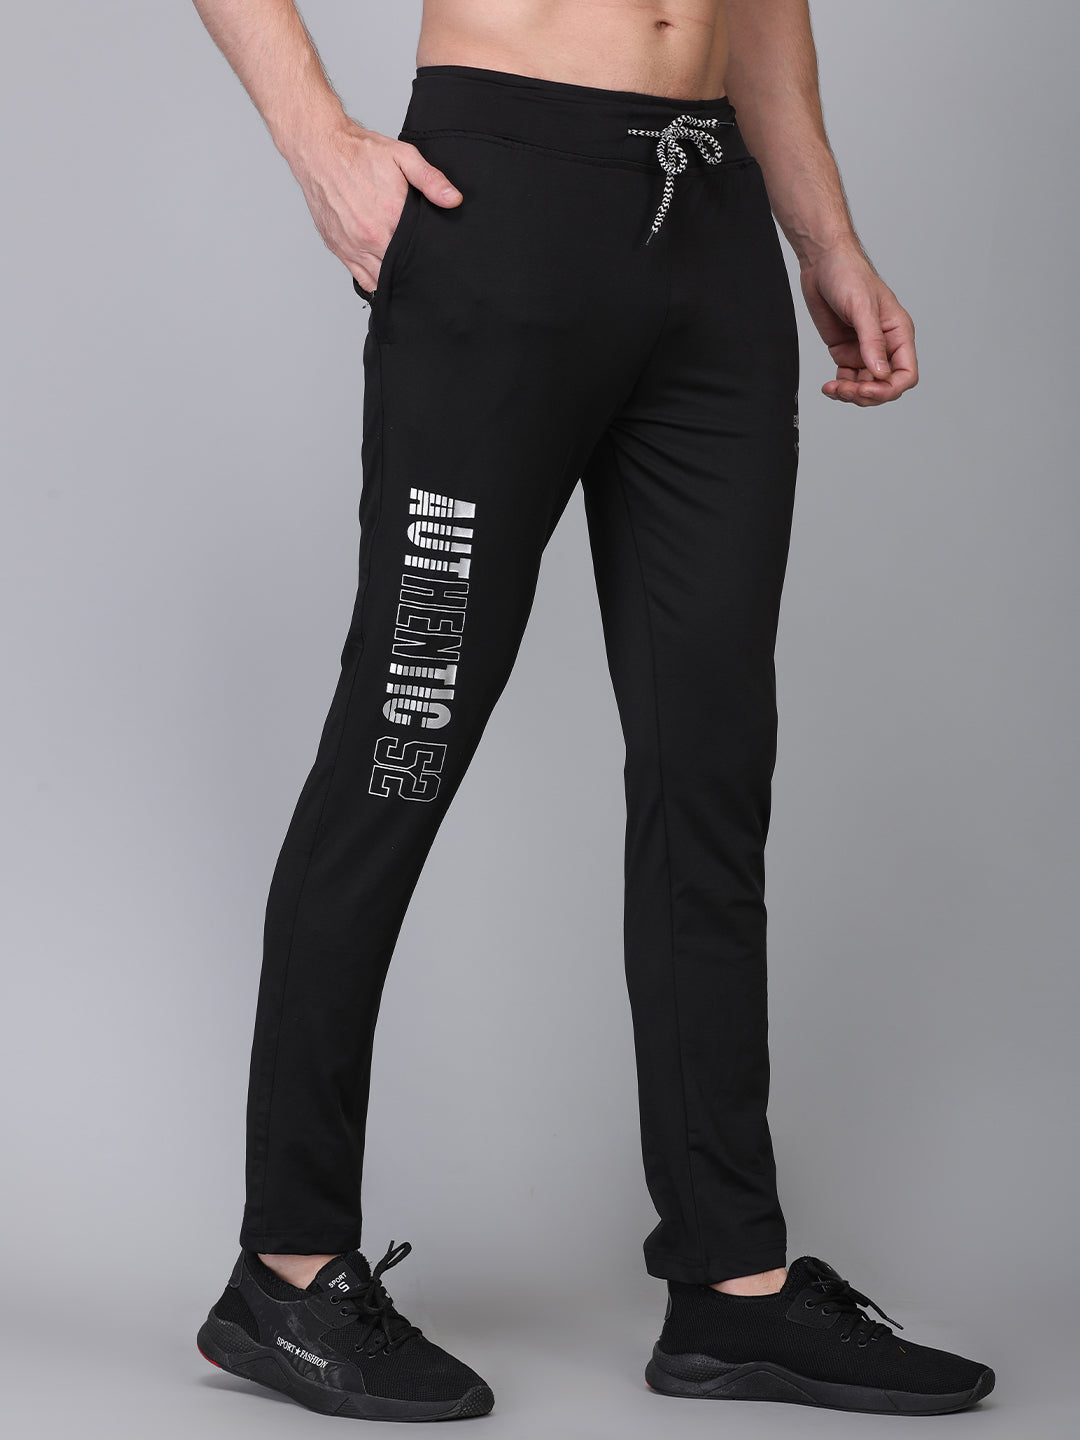 White Moon Men's Dry fit Track pants (Black) whitemoon.in